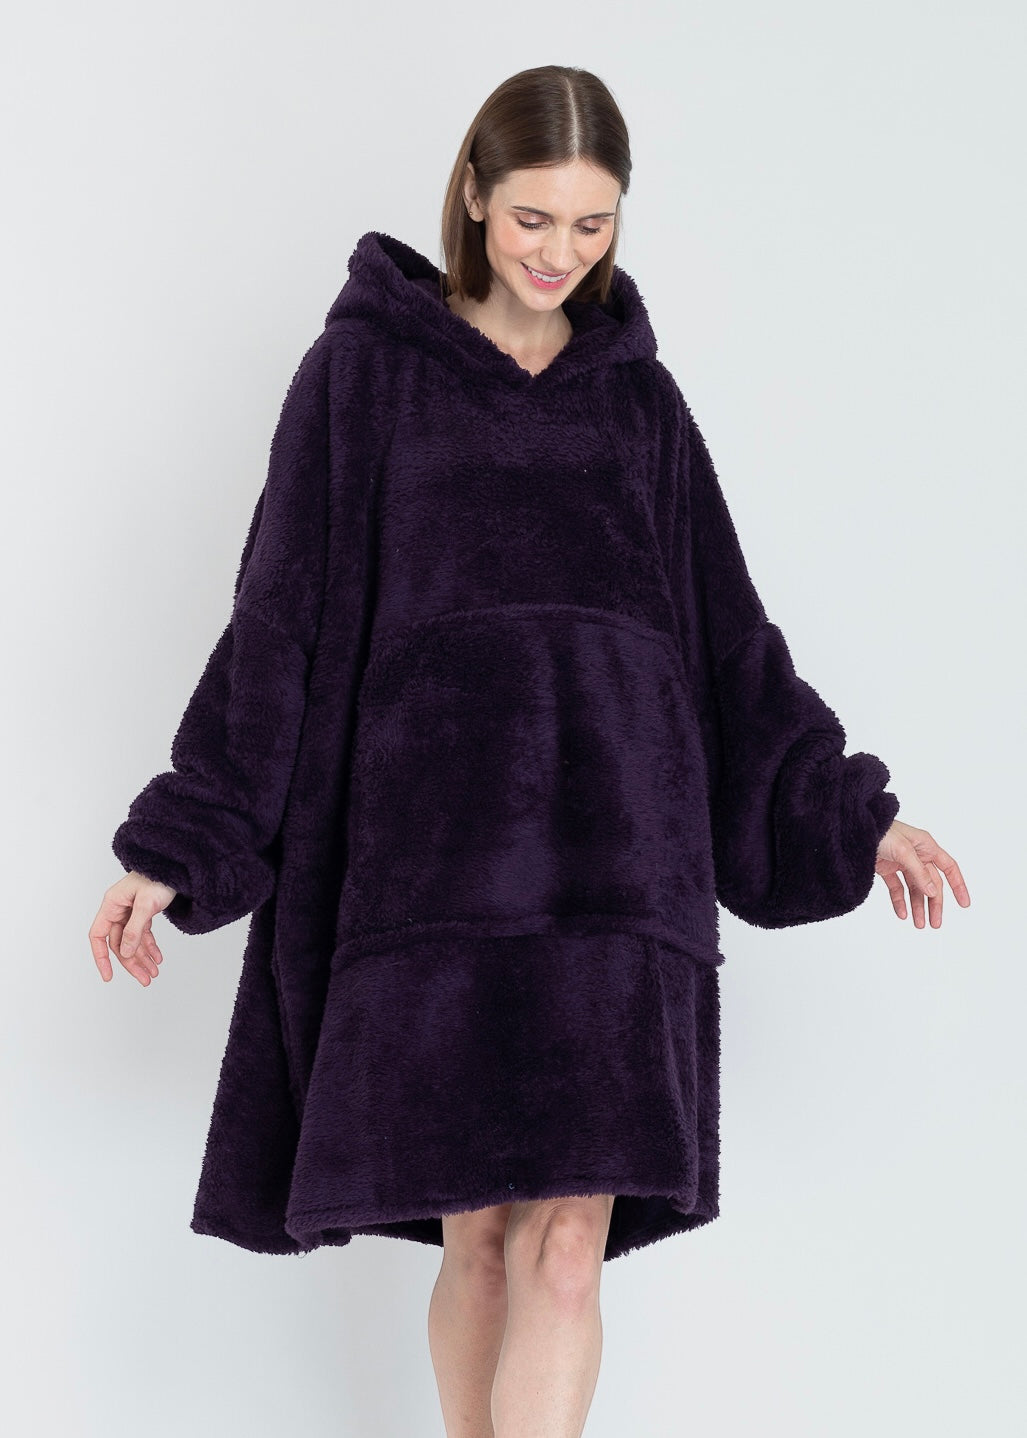 Wine Purple Cloudie® Luxe - The Cloudie Co. ultra soft cosy comfy Giant Wearable Blanket hoodie Unisex home or travel blanket hoodie travel blanket sofa blanket with sleeves hoodie blanket